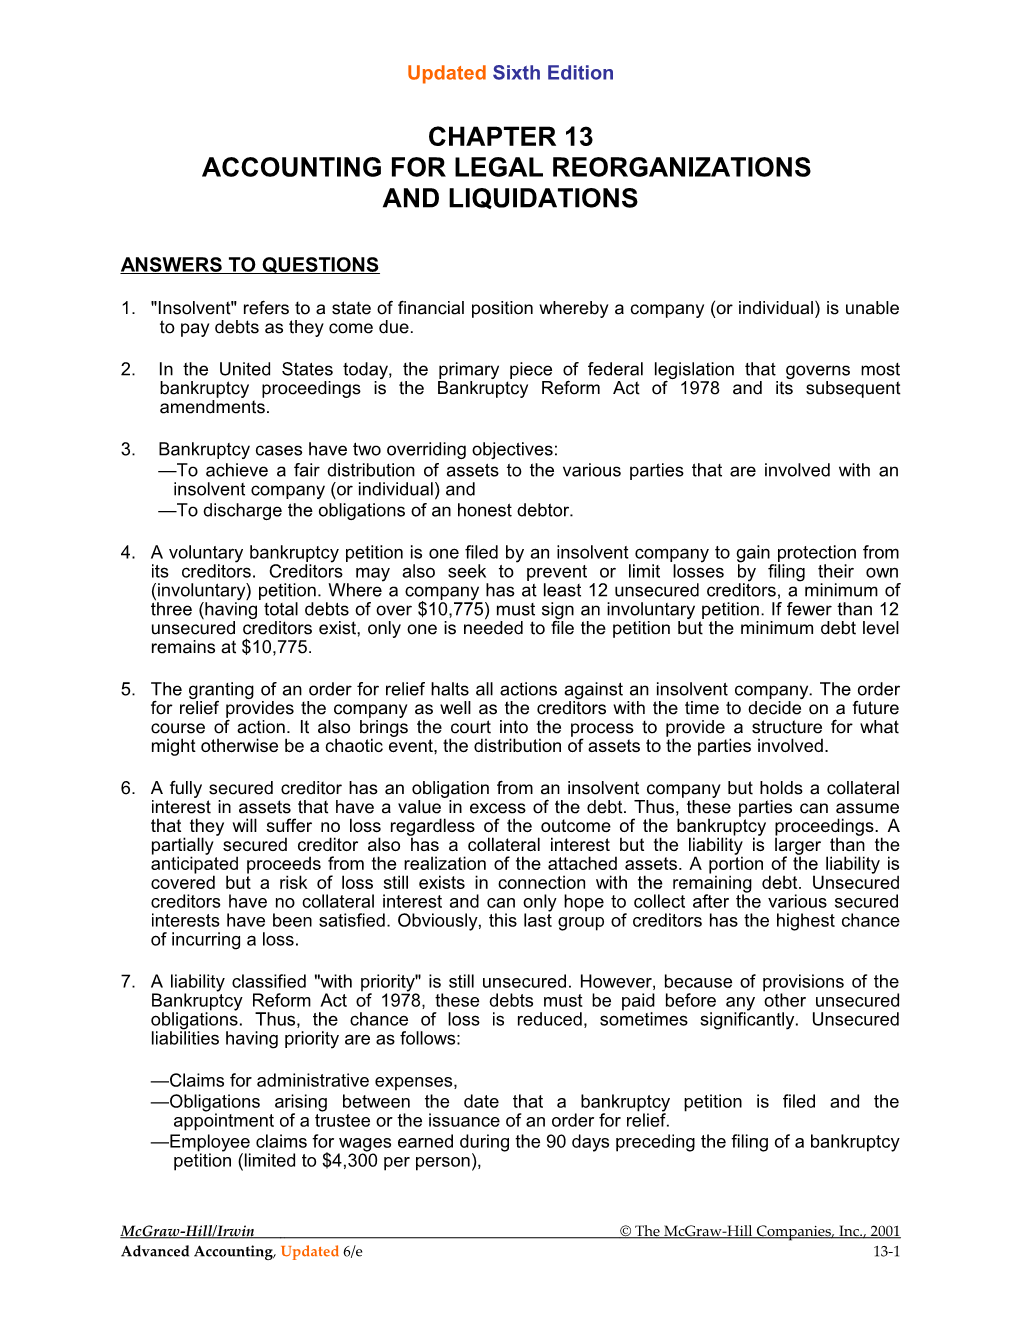 Accounting for Legal Reorganizations and LIQUIDATIONS